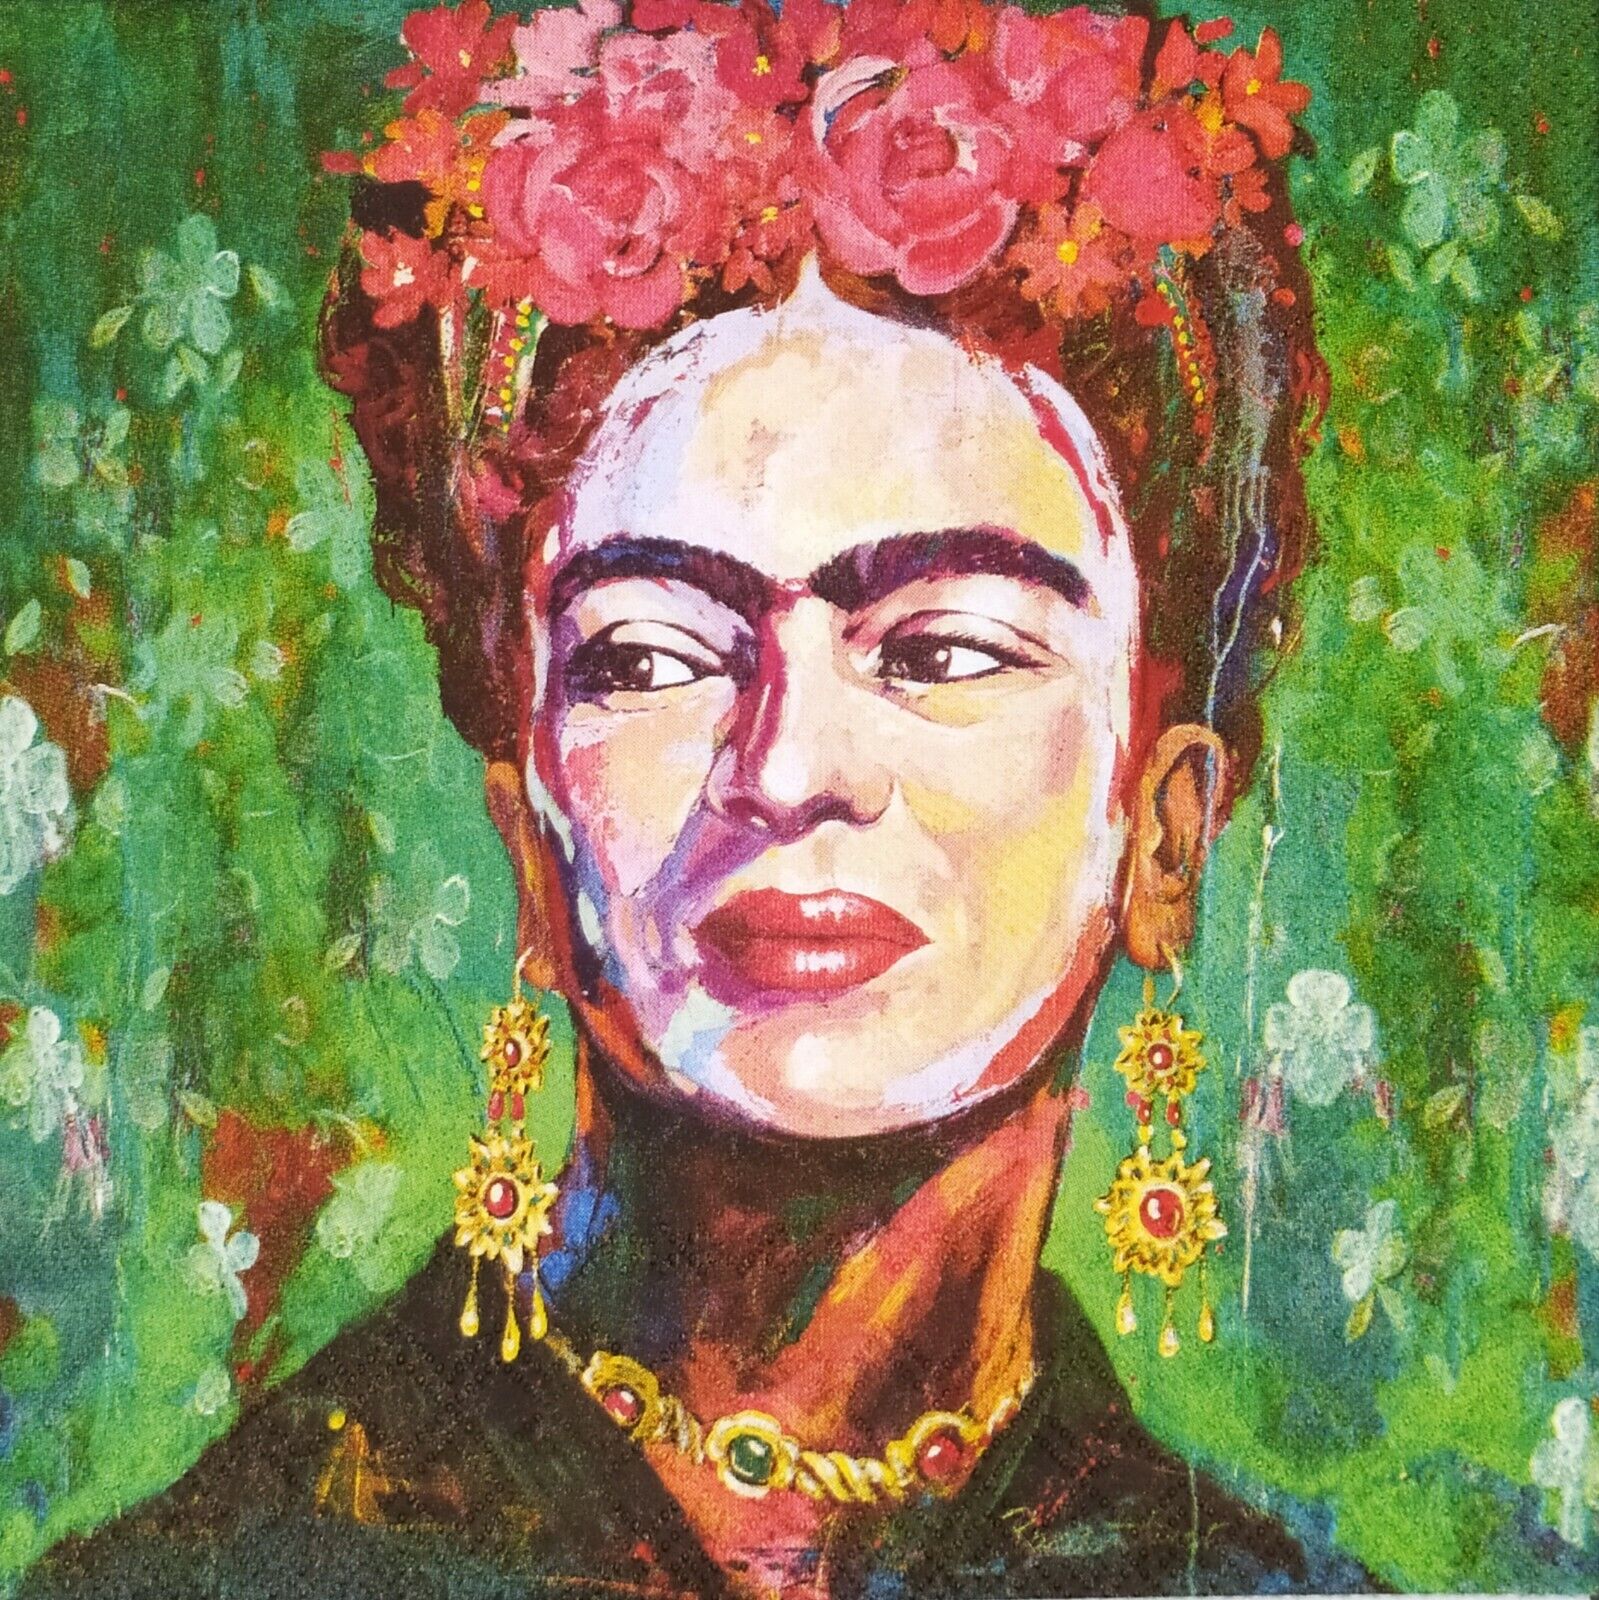 N948# 3 x Single Paper Napkins For Decoupage Painting Painted Lady Woman Frida